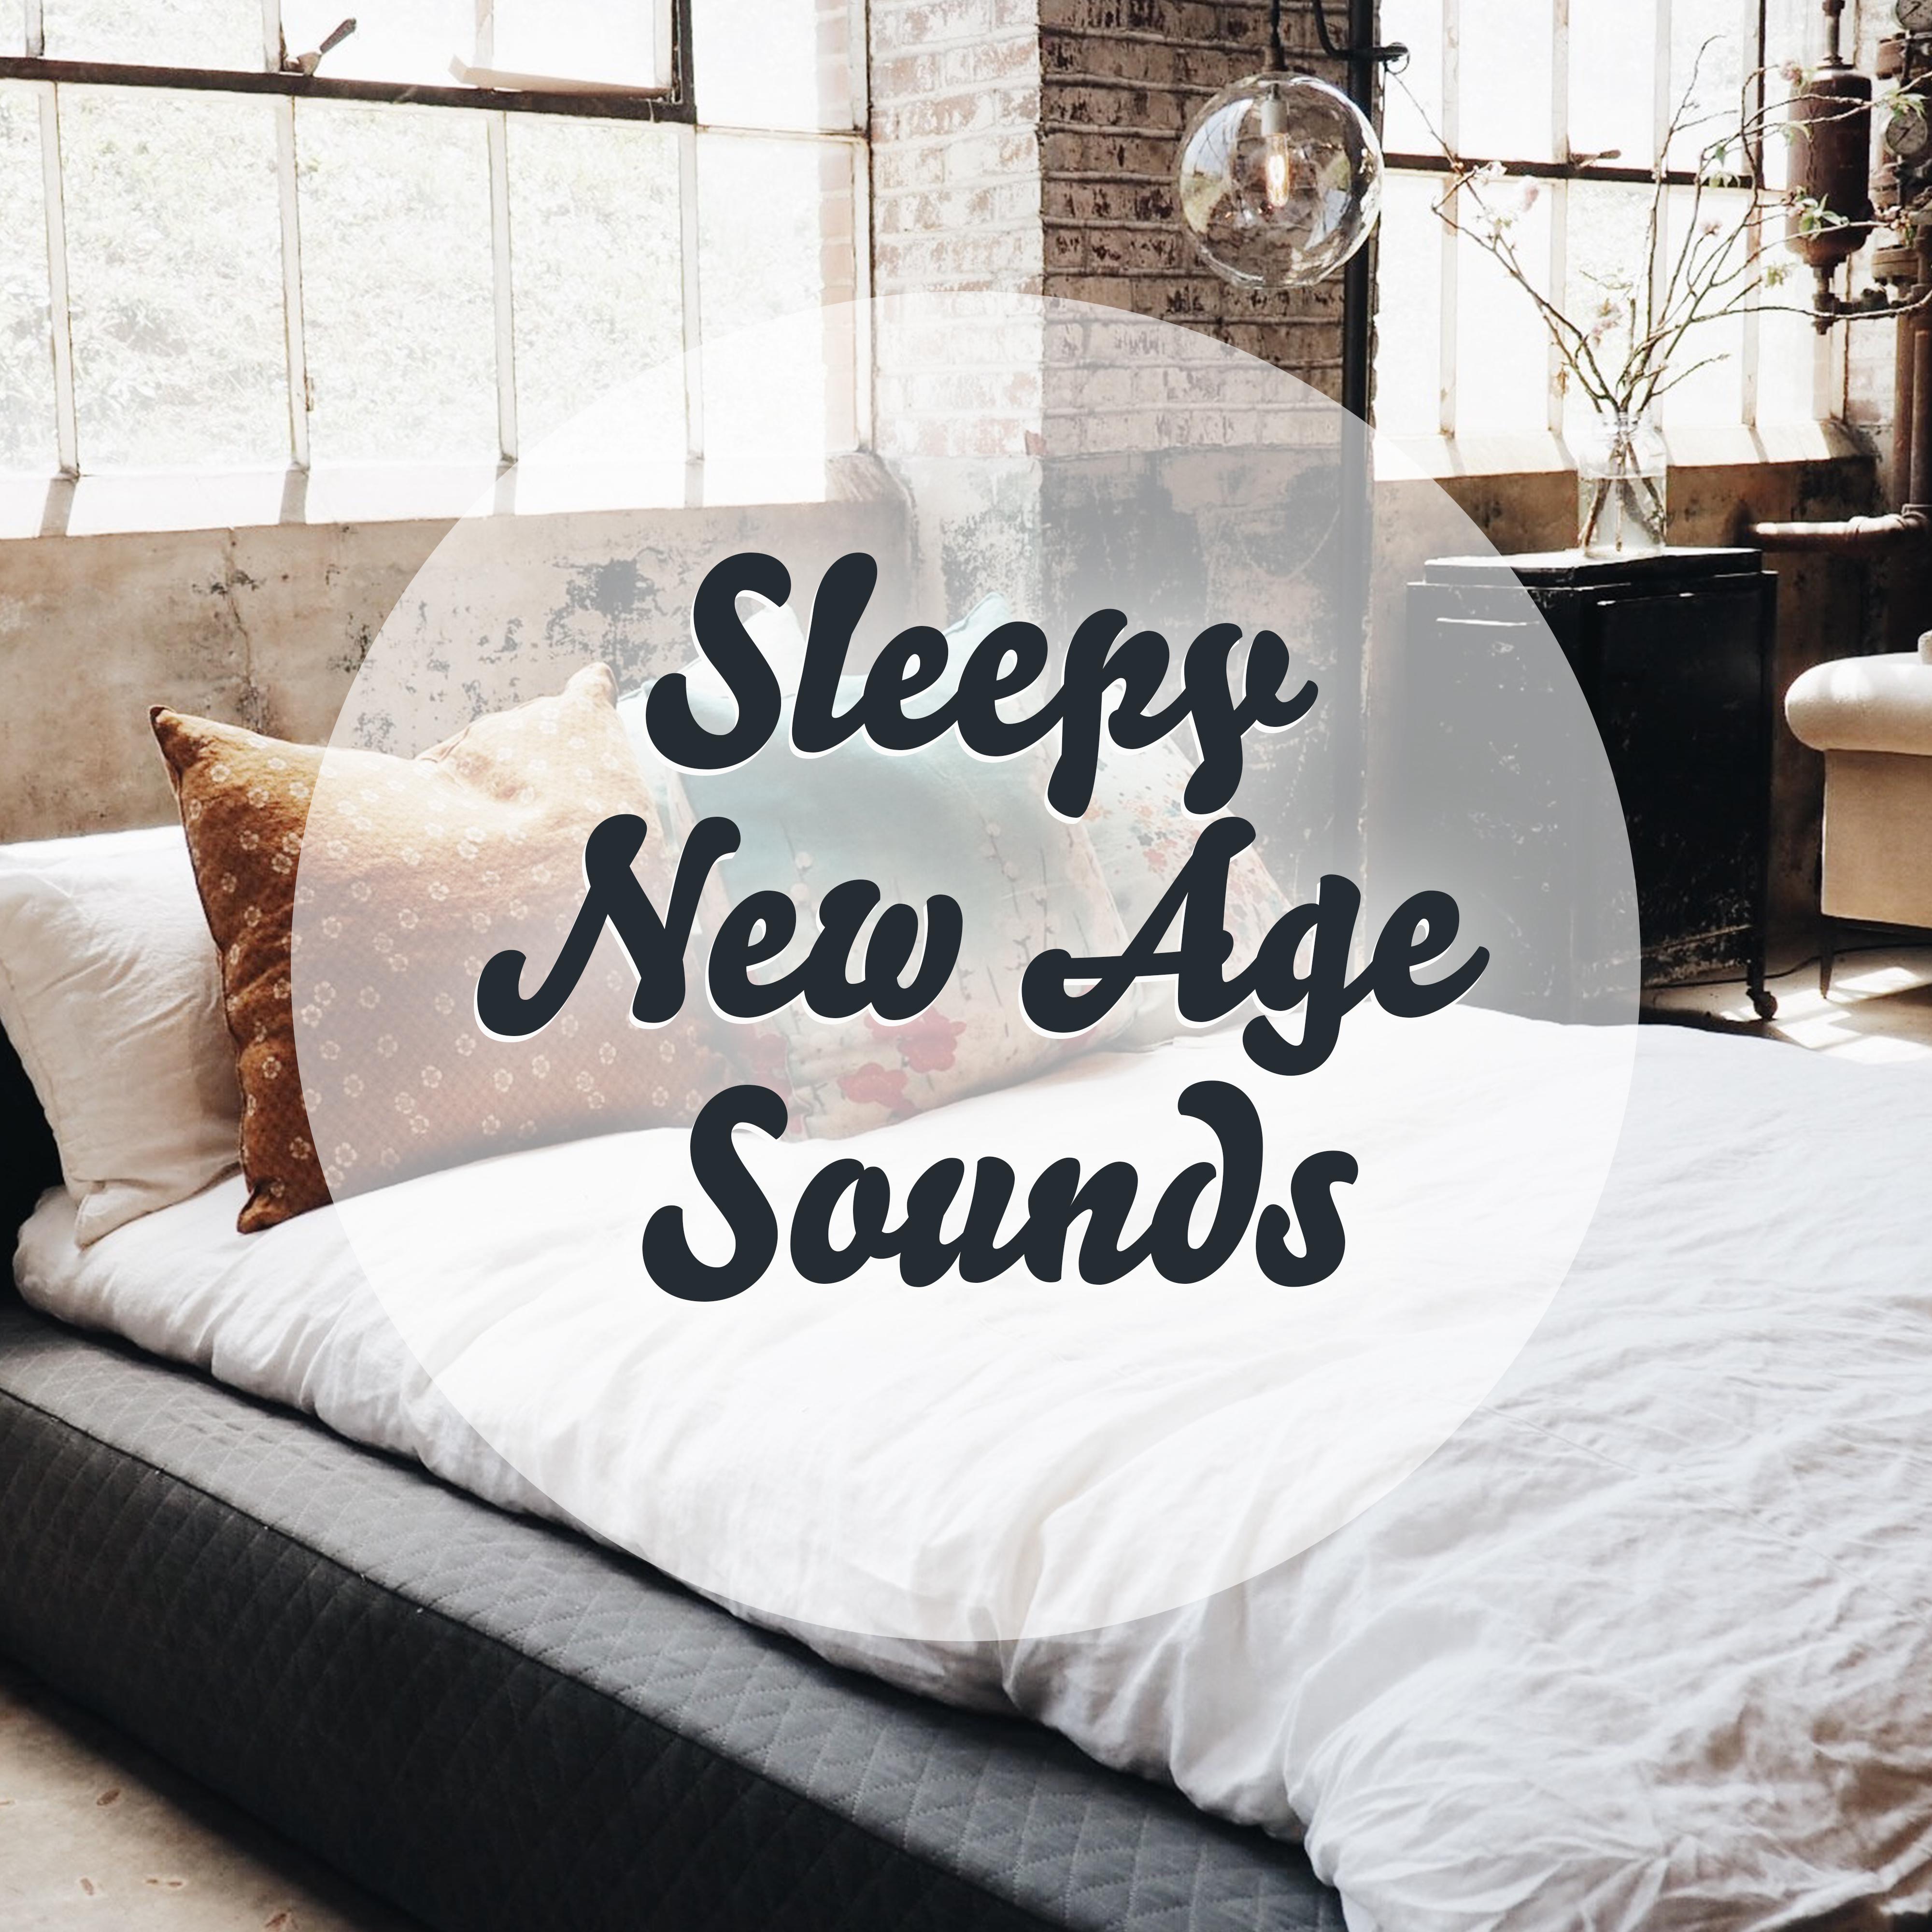 Sleepy New Age Sounds – to Sleep, As a Help in Insomnia, to Quickly and Easily Fall Asleep